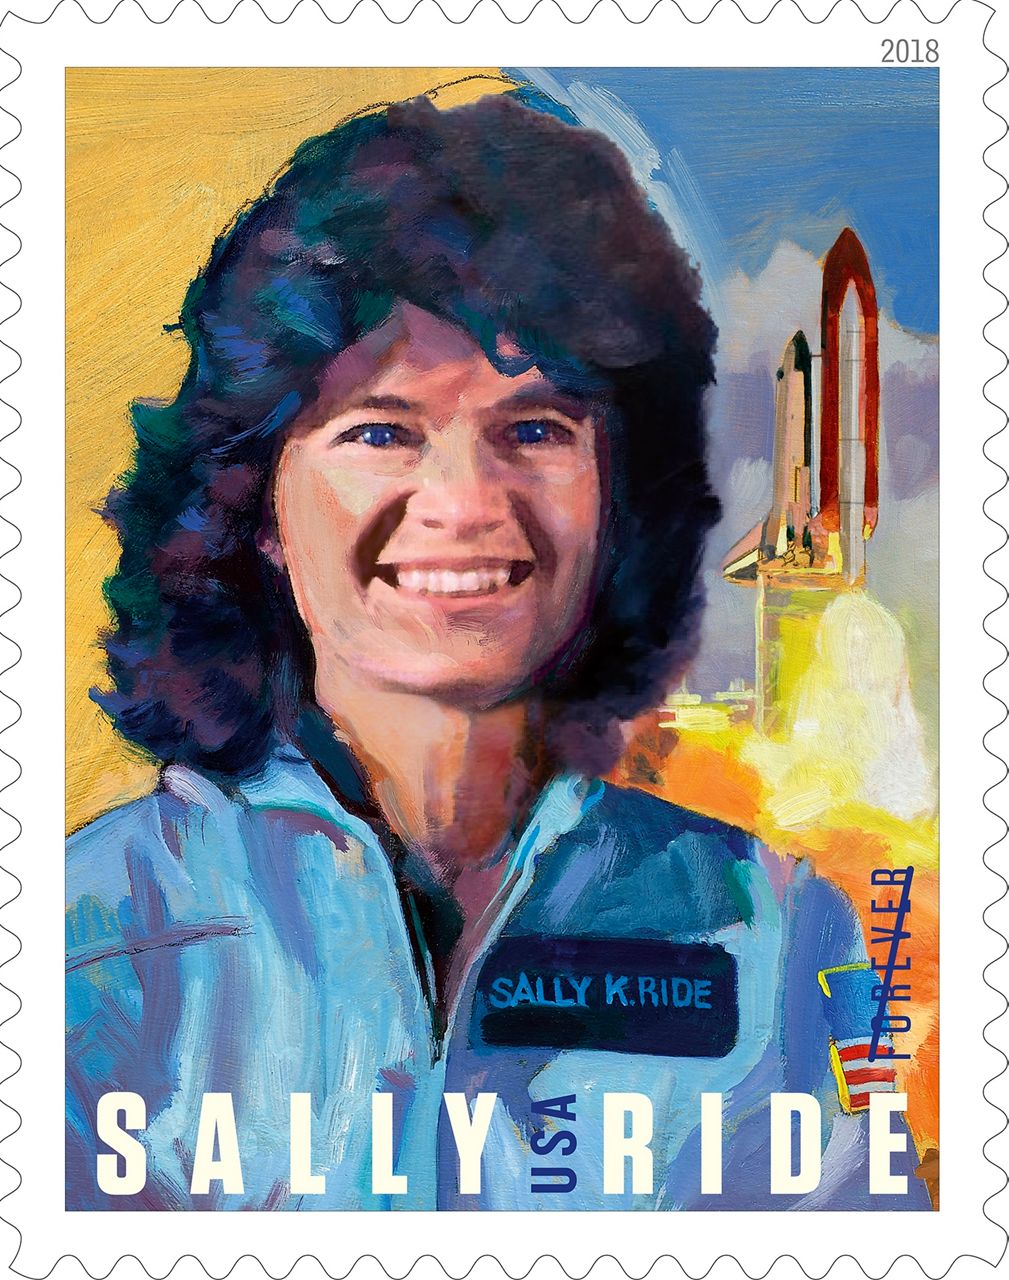 Sally Ride on a Forever stamp released by the United States Postal Service in 2018.